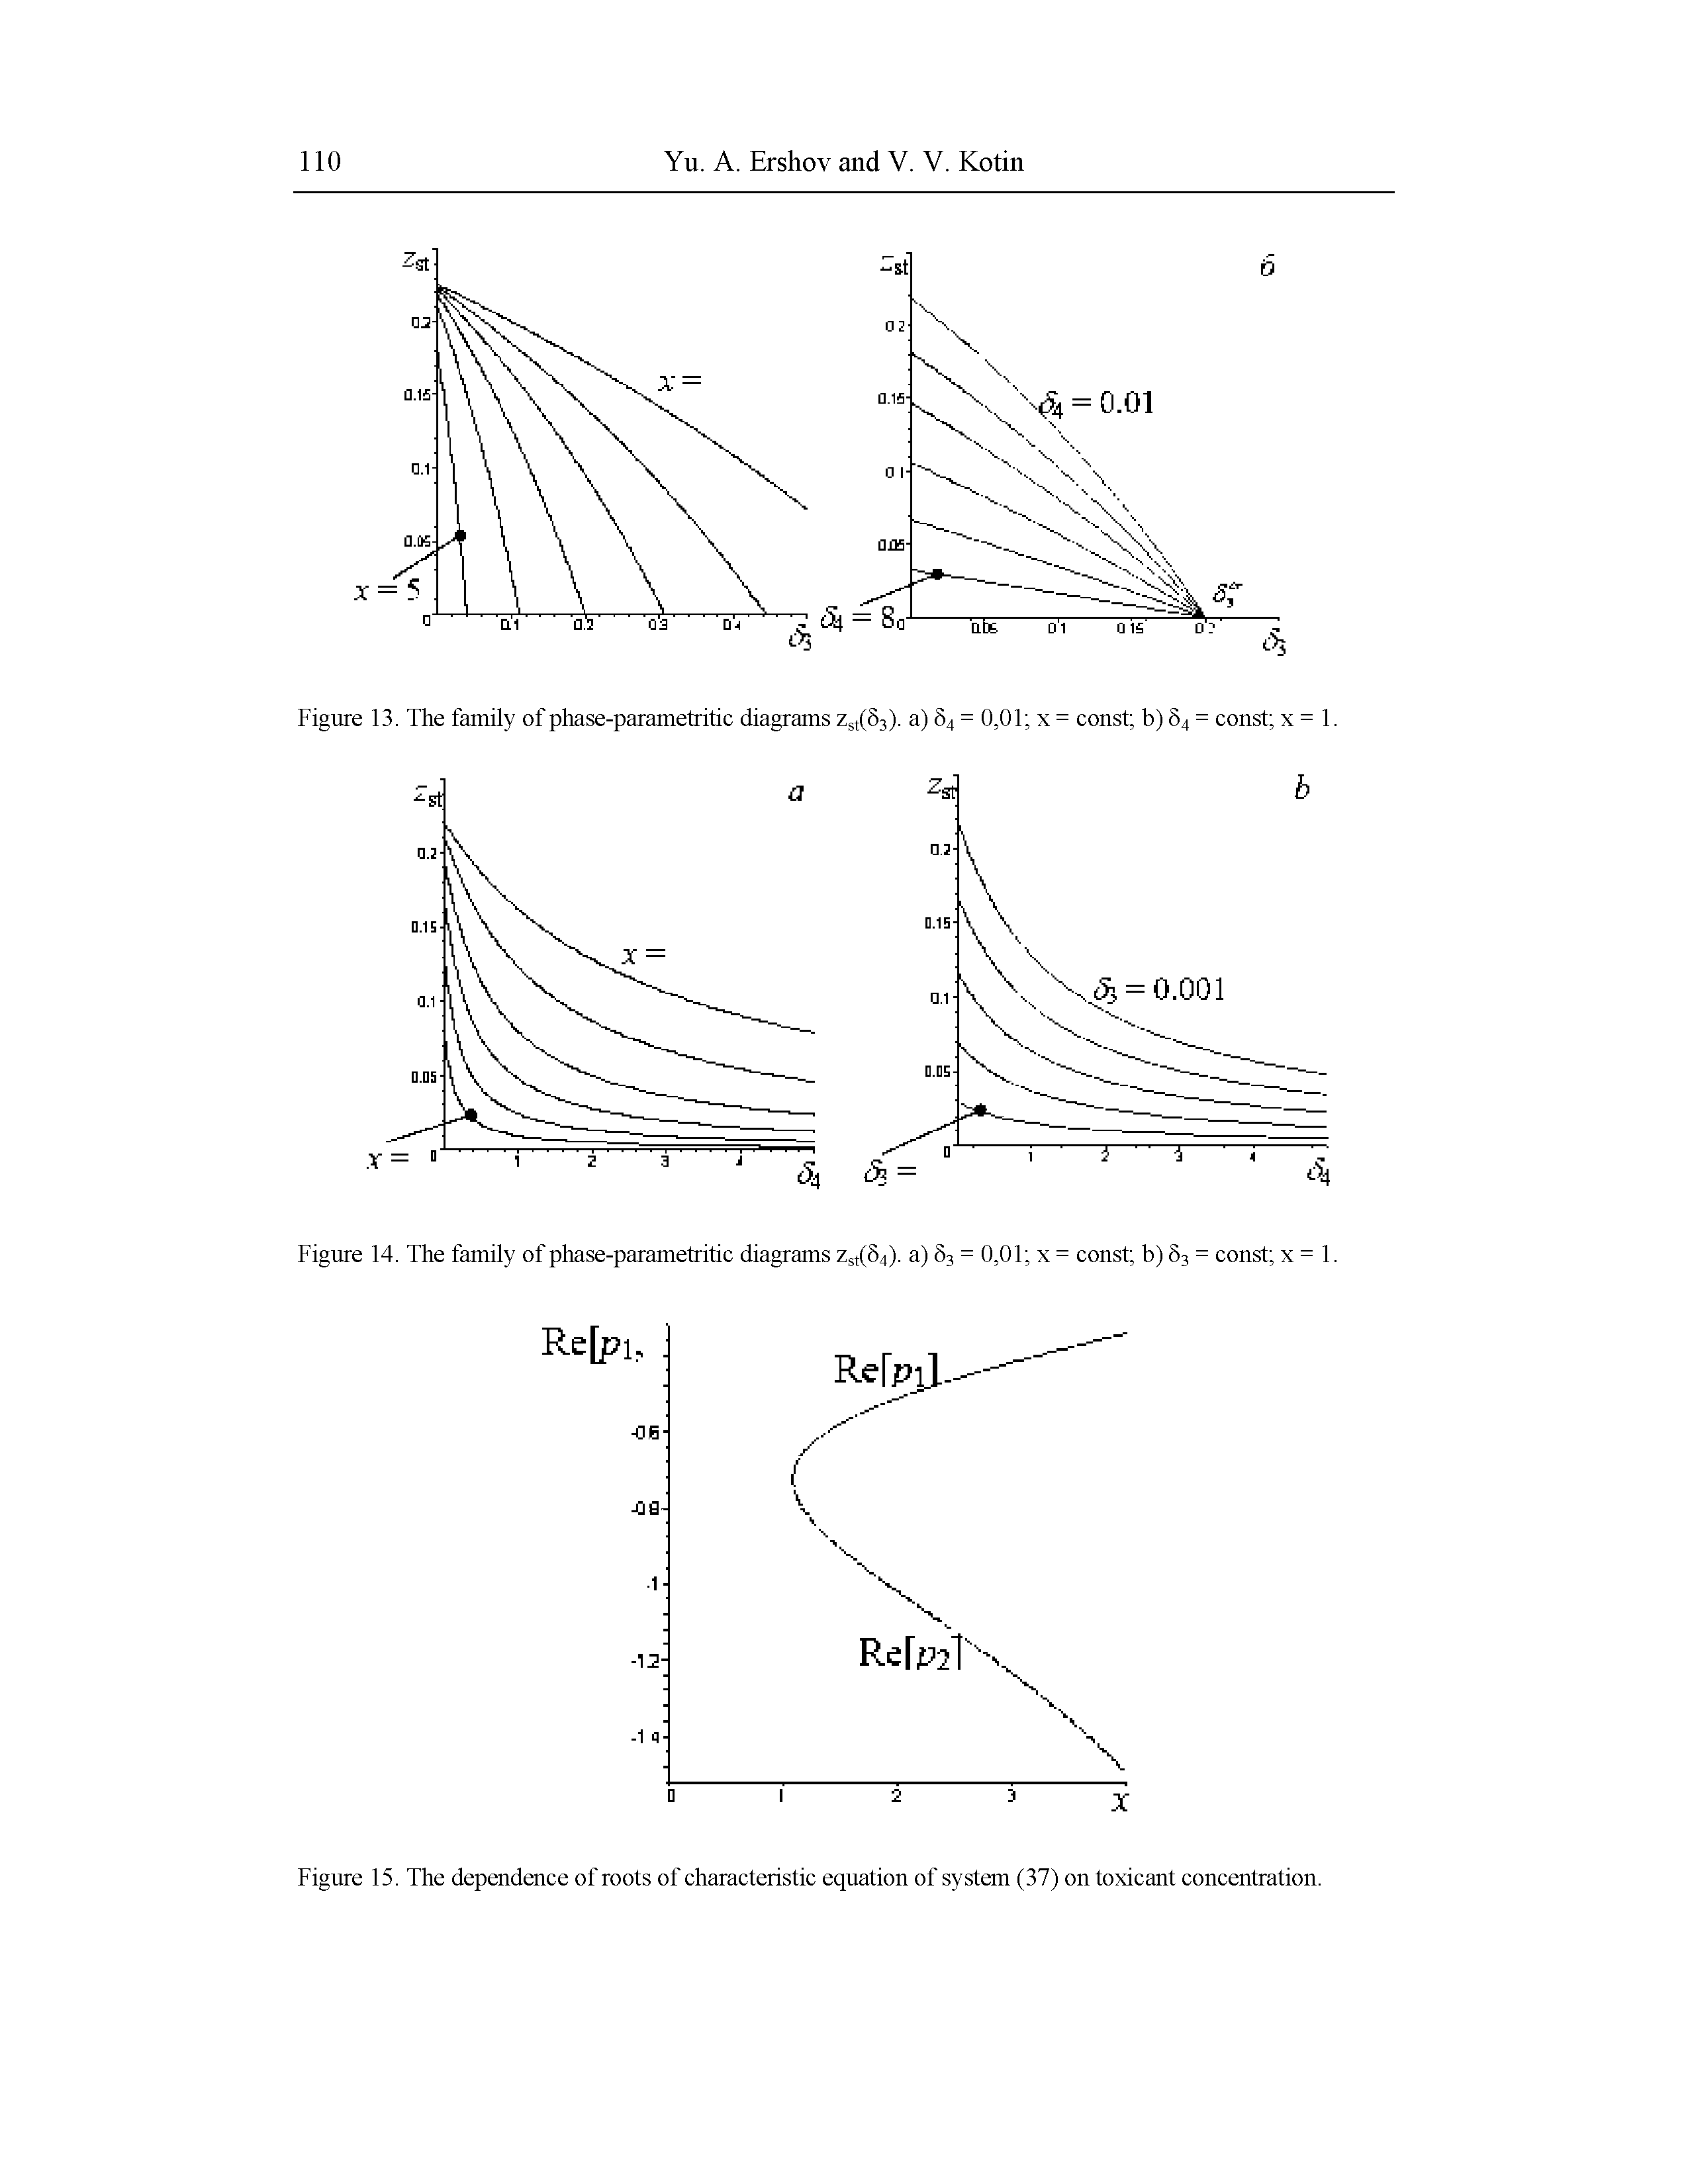 Figure 15. The dependence of roots of characteristic equation of system (37) on toxicant concentration.